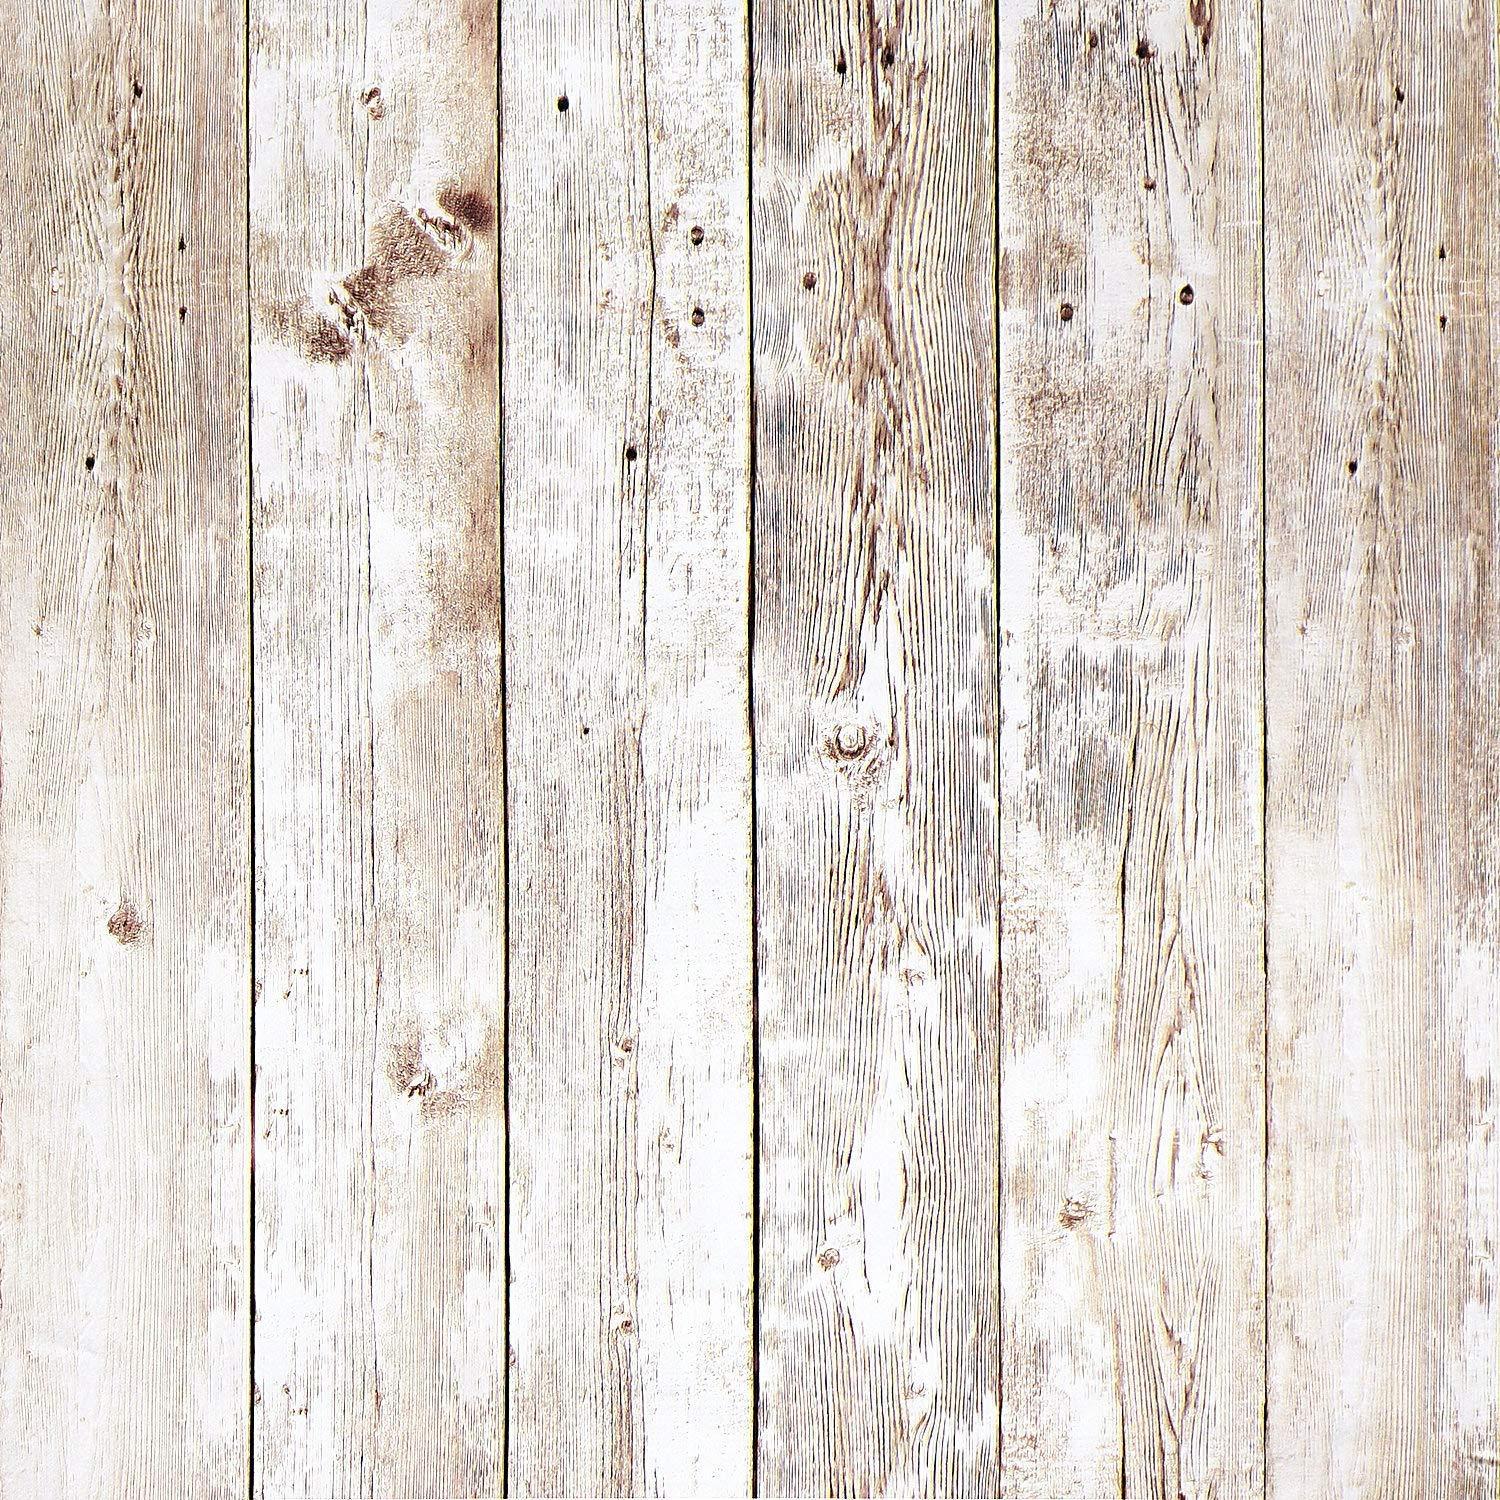 OLD WEATHERED DISTRESSED CABIN WOOD TIMBER WALL ARTHOUSE VIP WALLPAPER 622009 